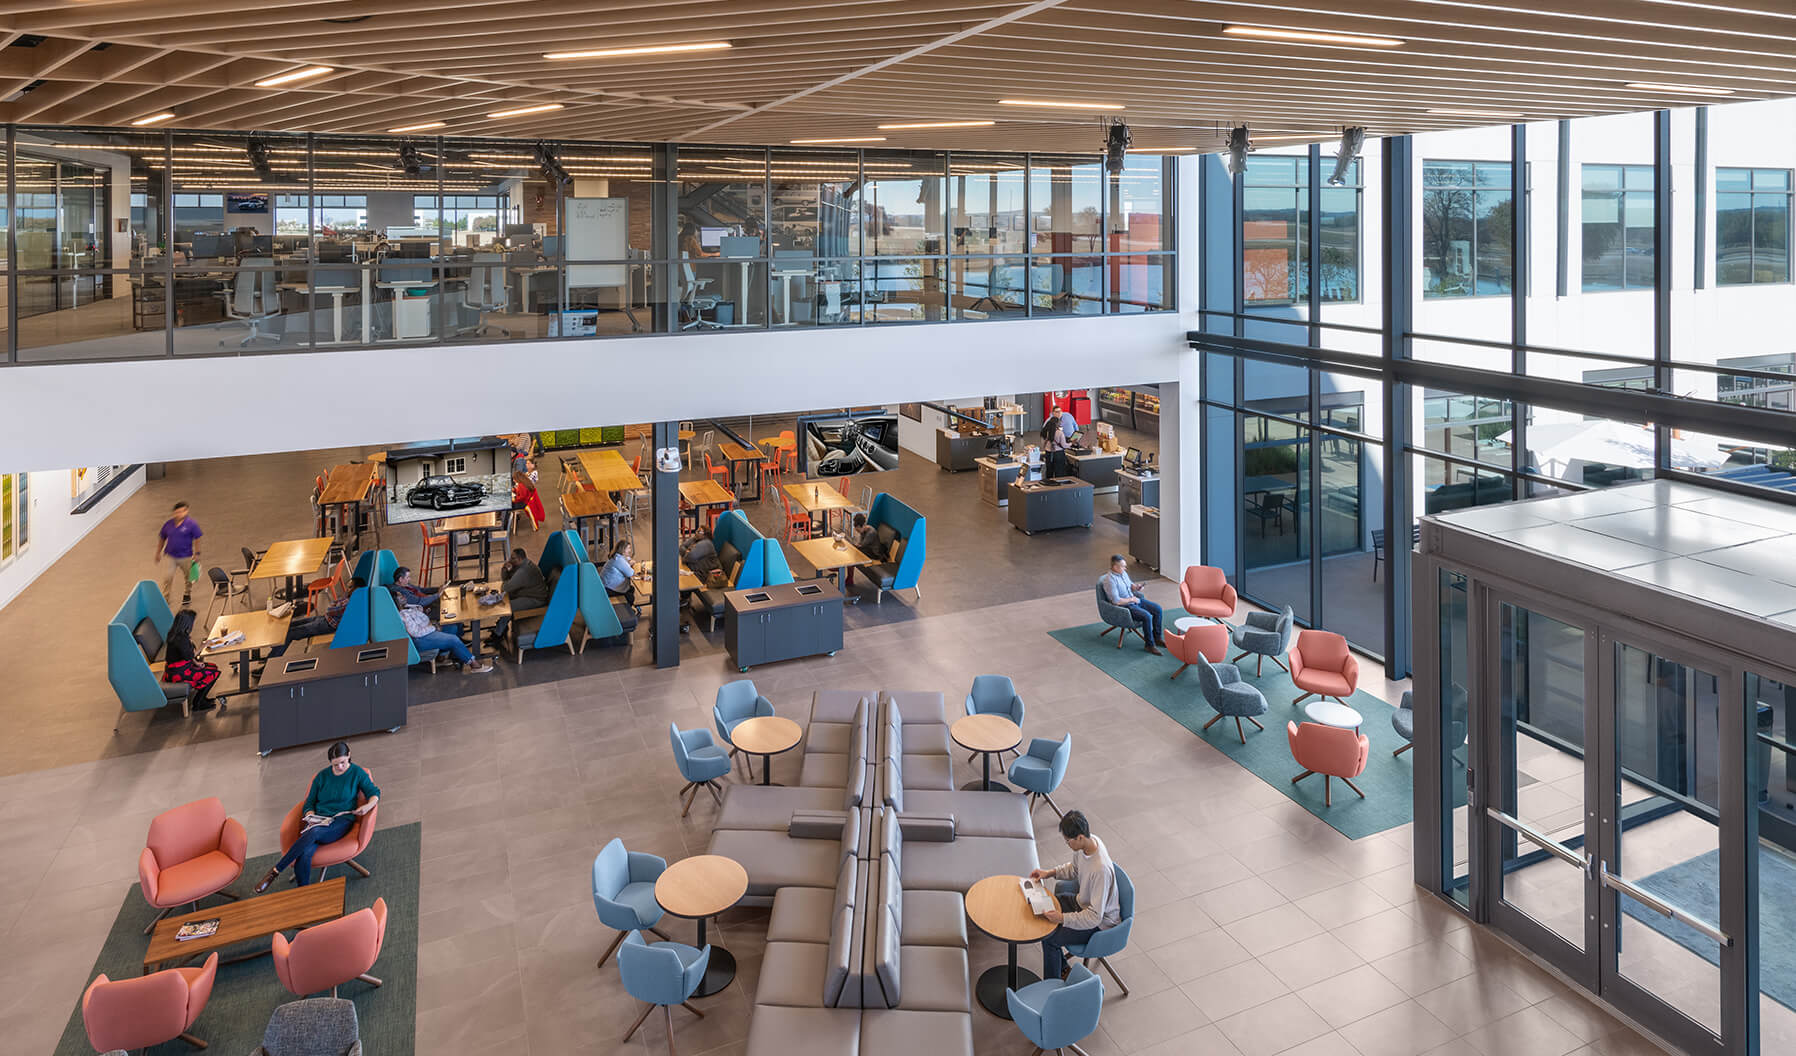 Workstations on the upper level of the building catch a bird’s-eye view of the cafeteria and collaborative area below. The glass allows natural daylight to permeate throughout all aspects of the space.